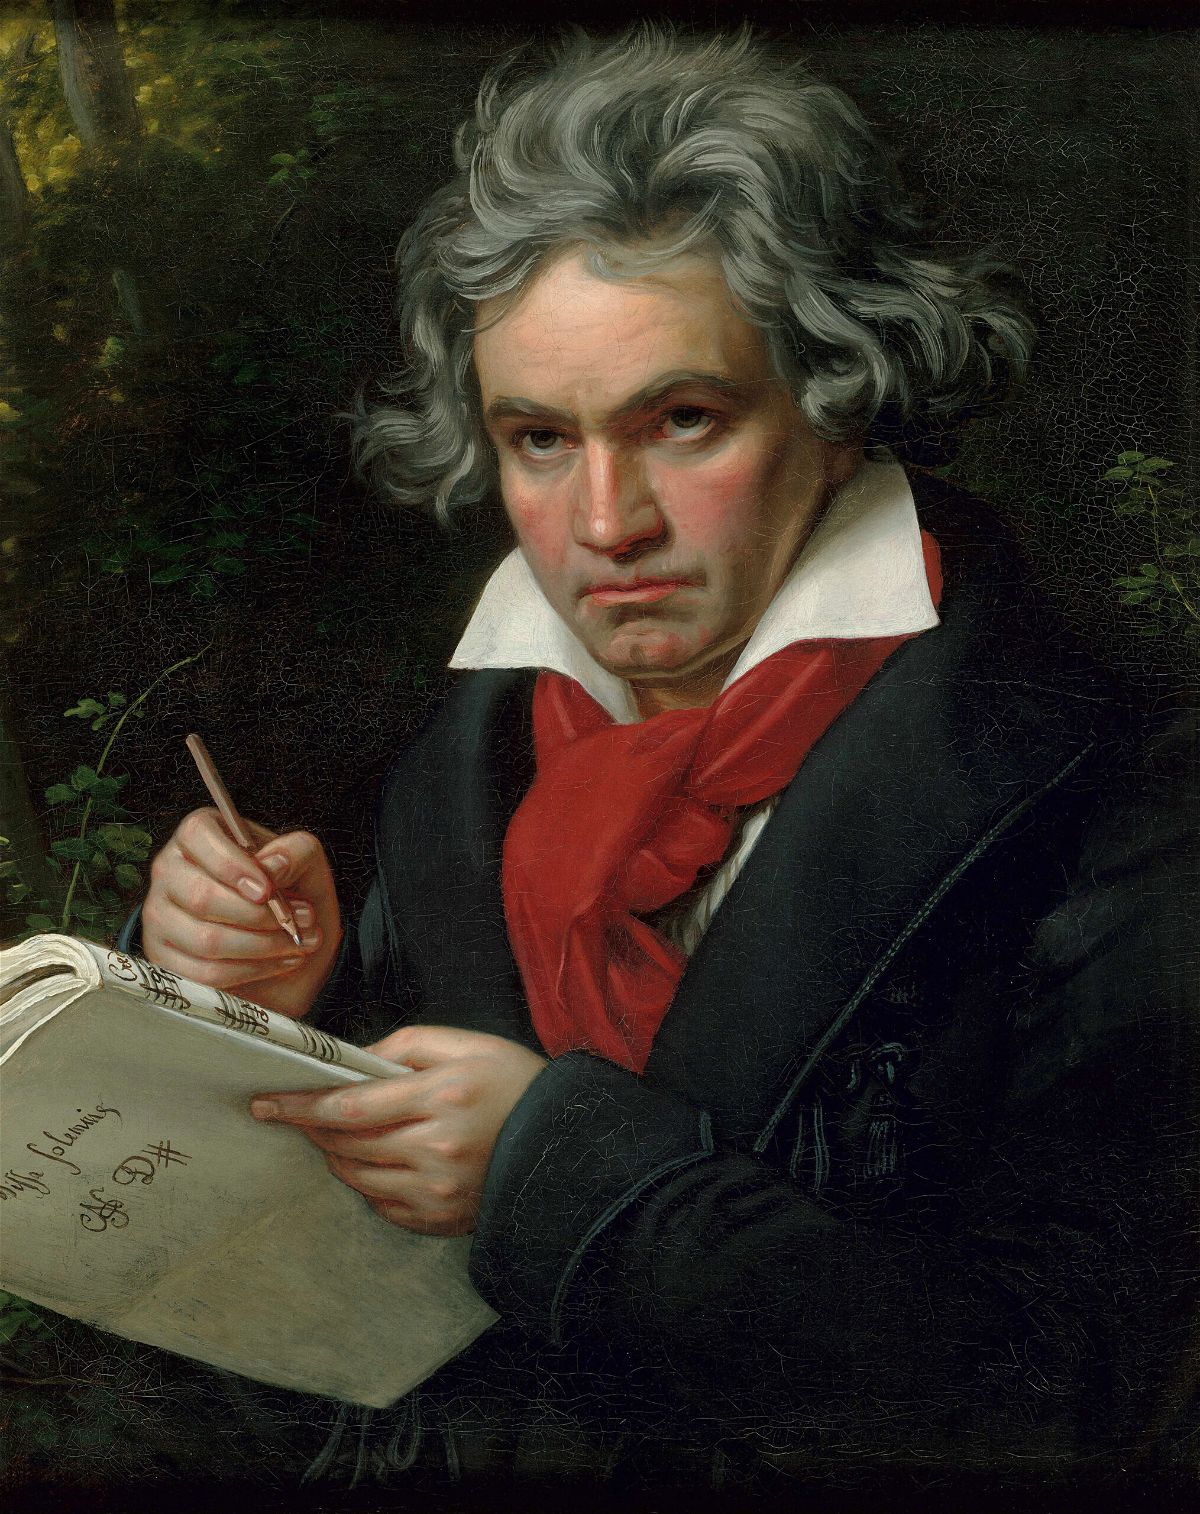 <i>Beethoven-Haus Bonn</i><br/>A portrait of Beethoven by Joseph Karl Stieler was completed in 1820.